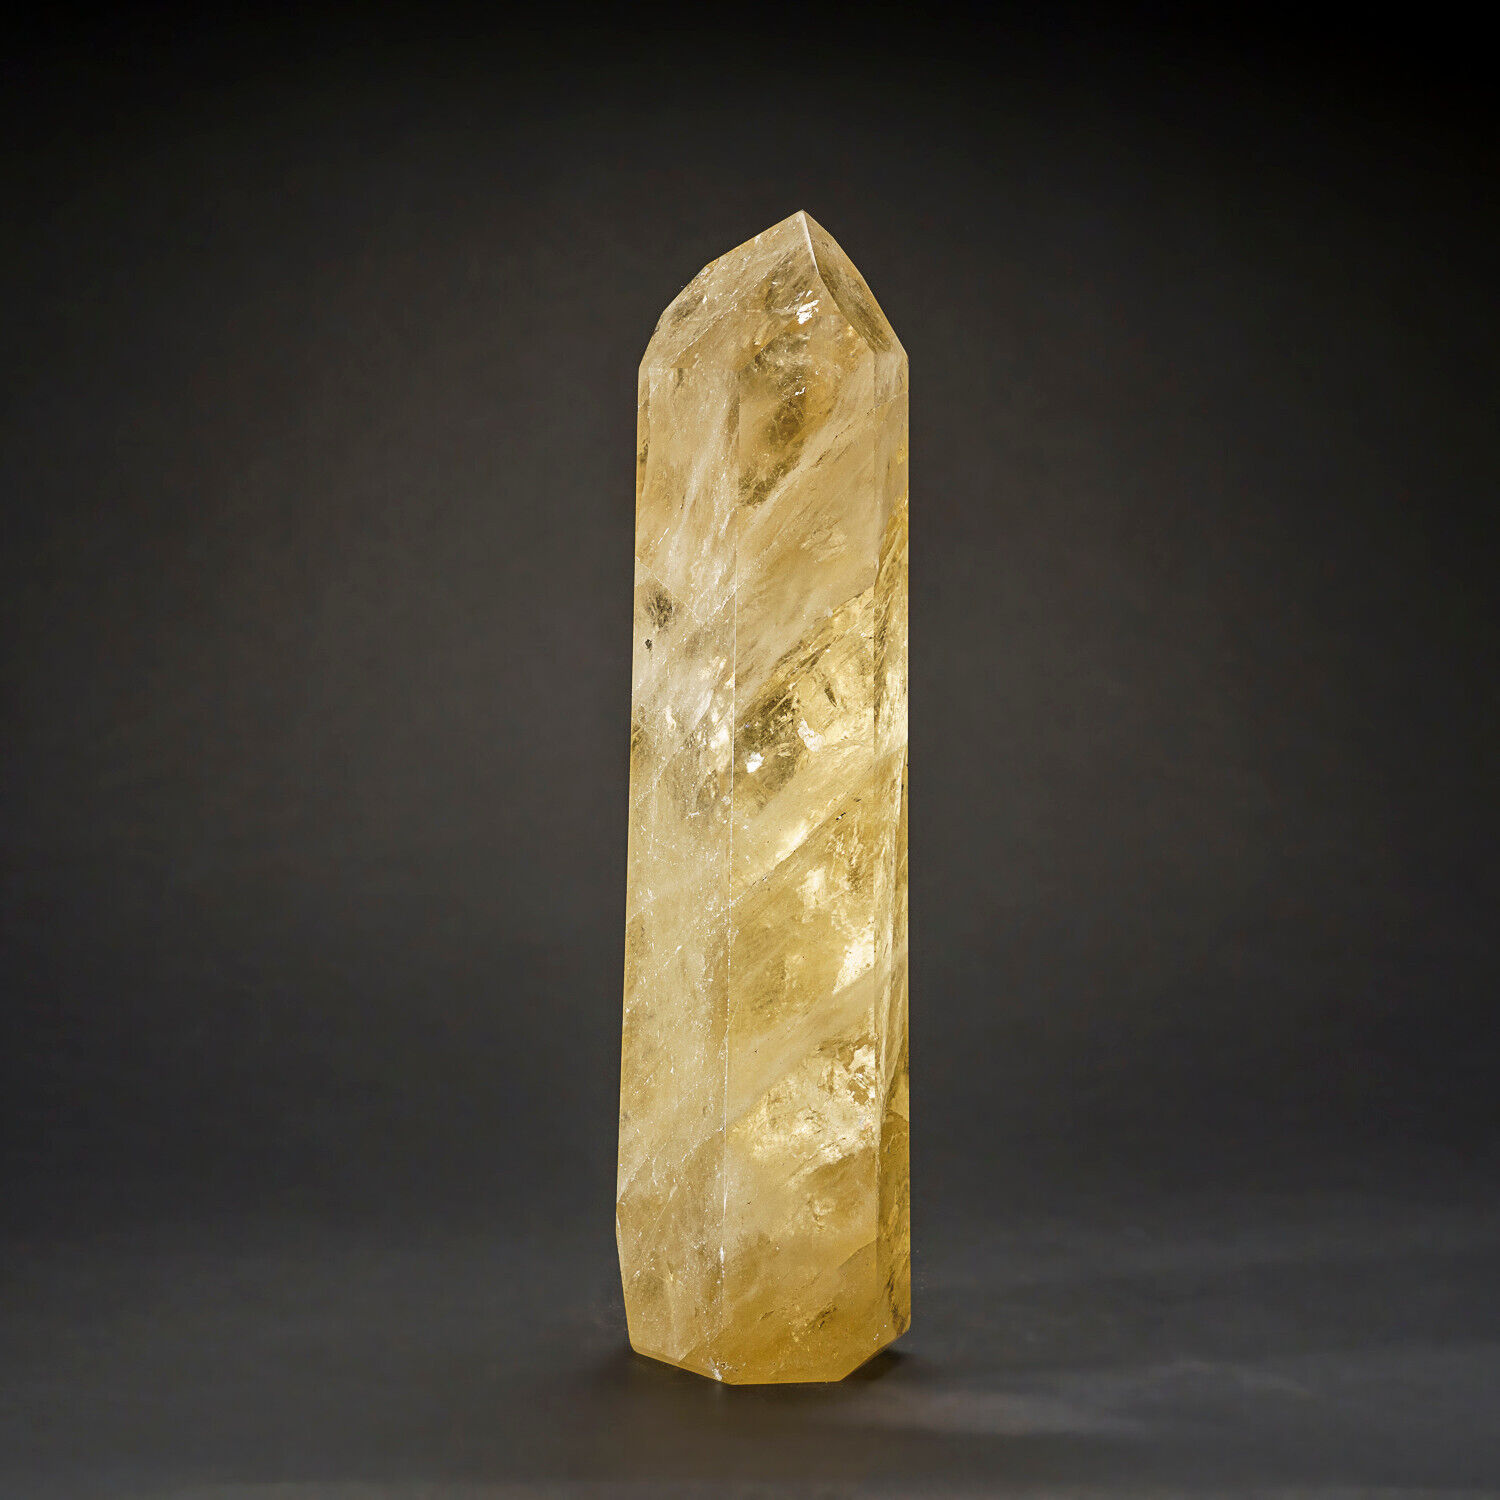 Genuine Museum Quality Citrine Crystal Point from Brazil (5.5 lbs)